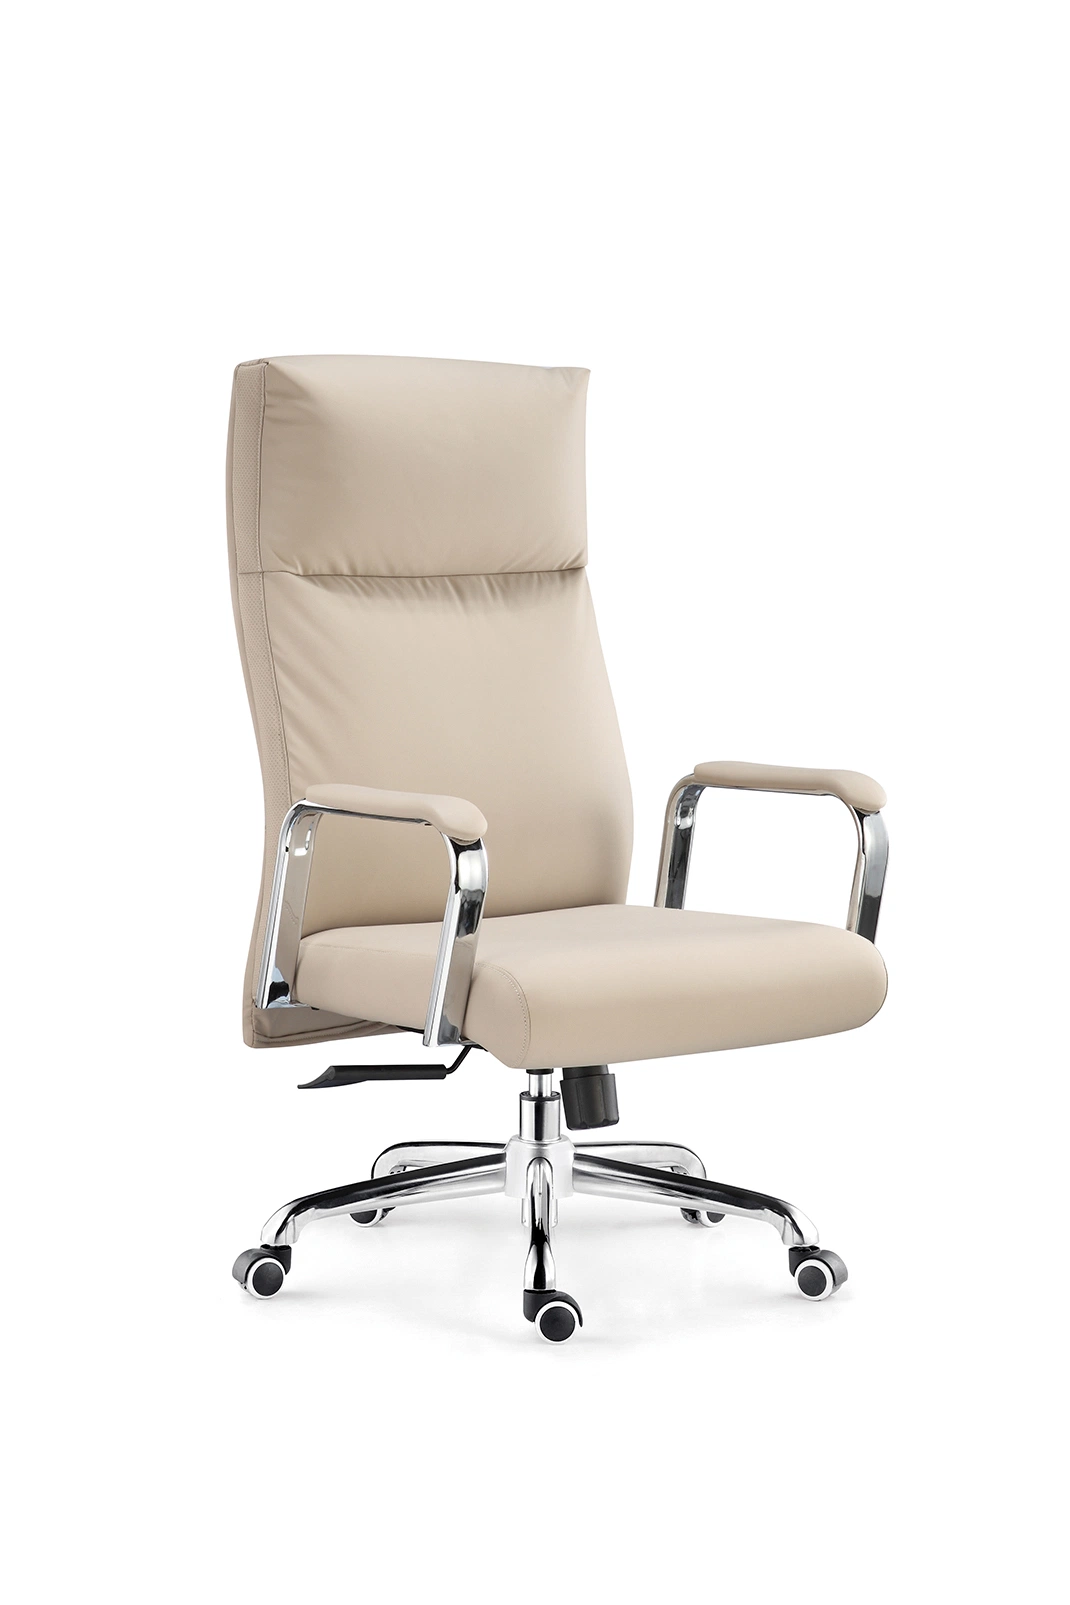 Modern Office Furniture Working From Home Leather Executive Chair